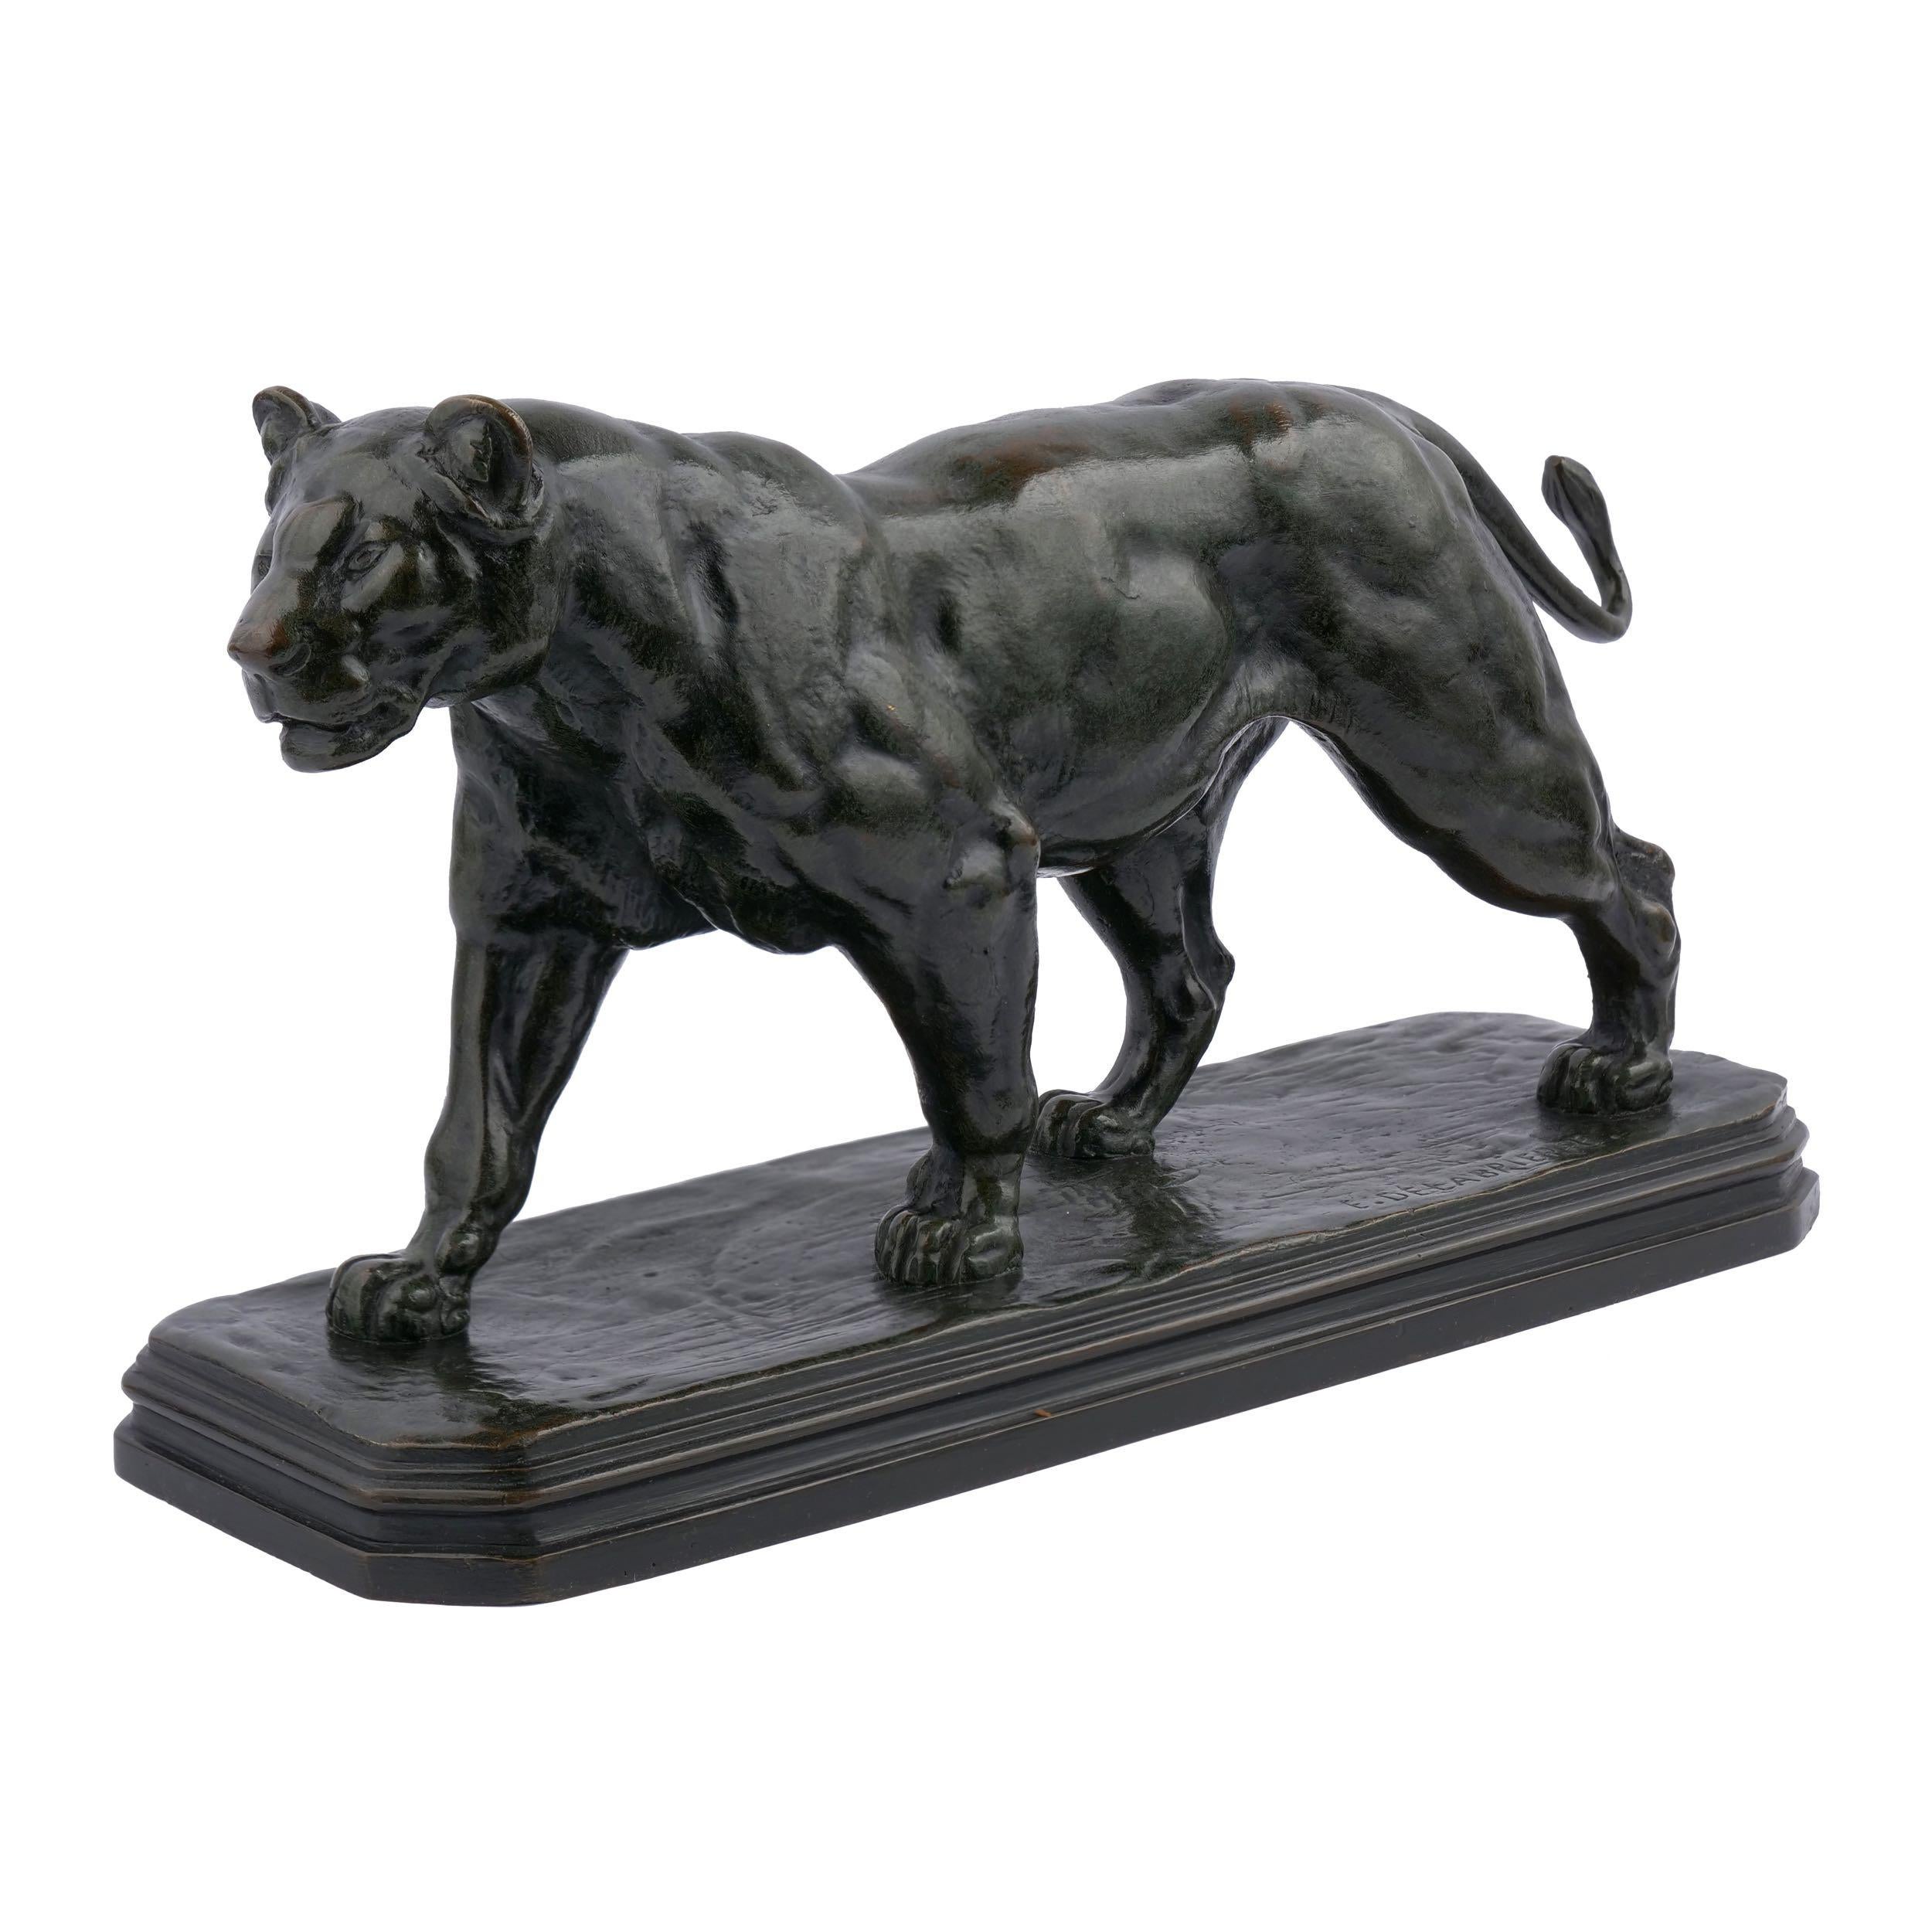 Romantic French Antique Bronze Sculpture of Marching Lion by Paul Edouard Delabrierre